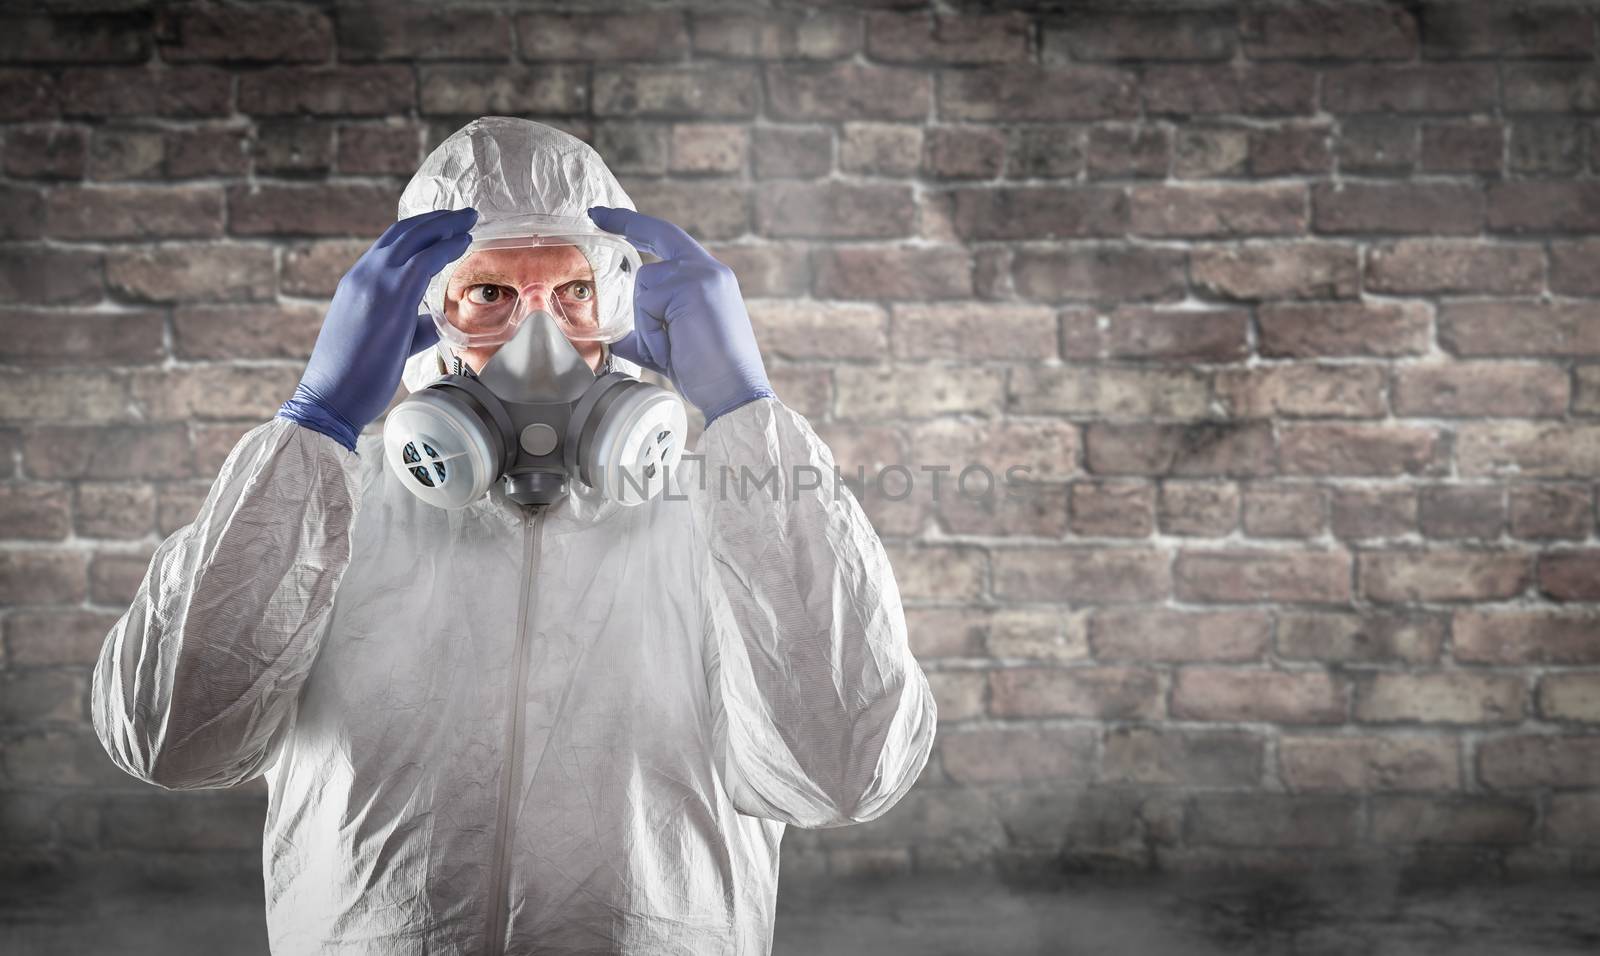 Man Wearing Hazmat Suit, Protective Gas Mask and Goggles Against Brick Wall